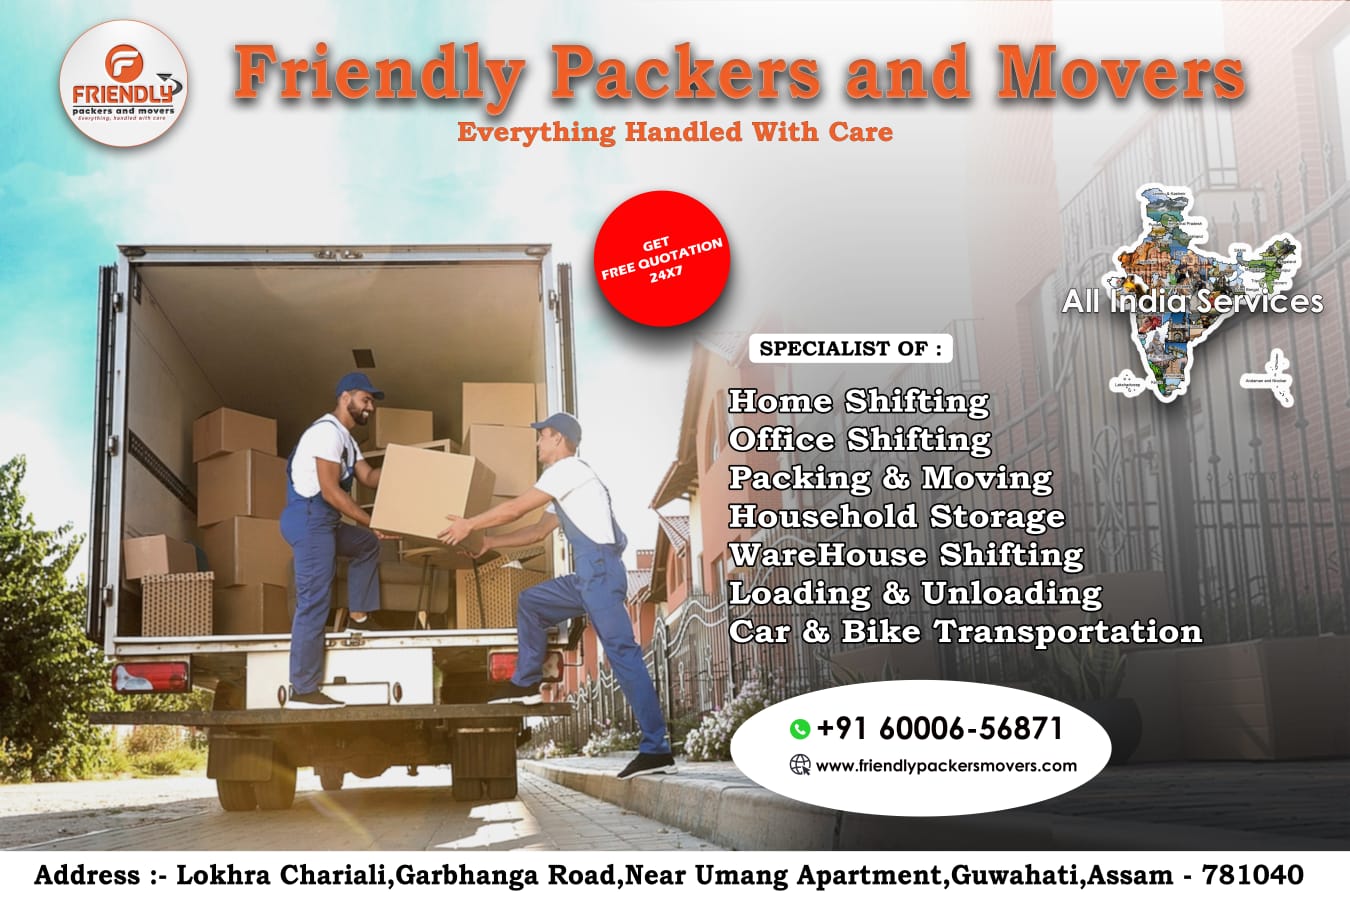 Friendly Packers and Movers